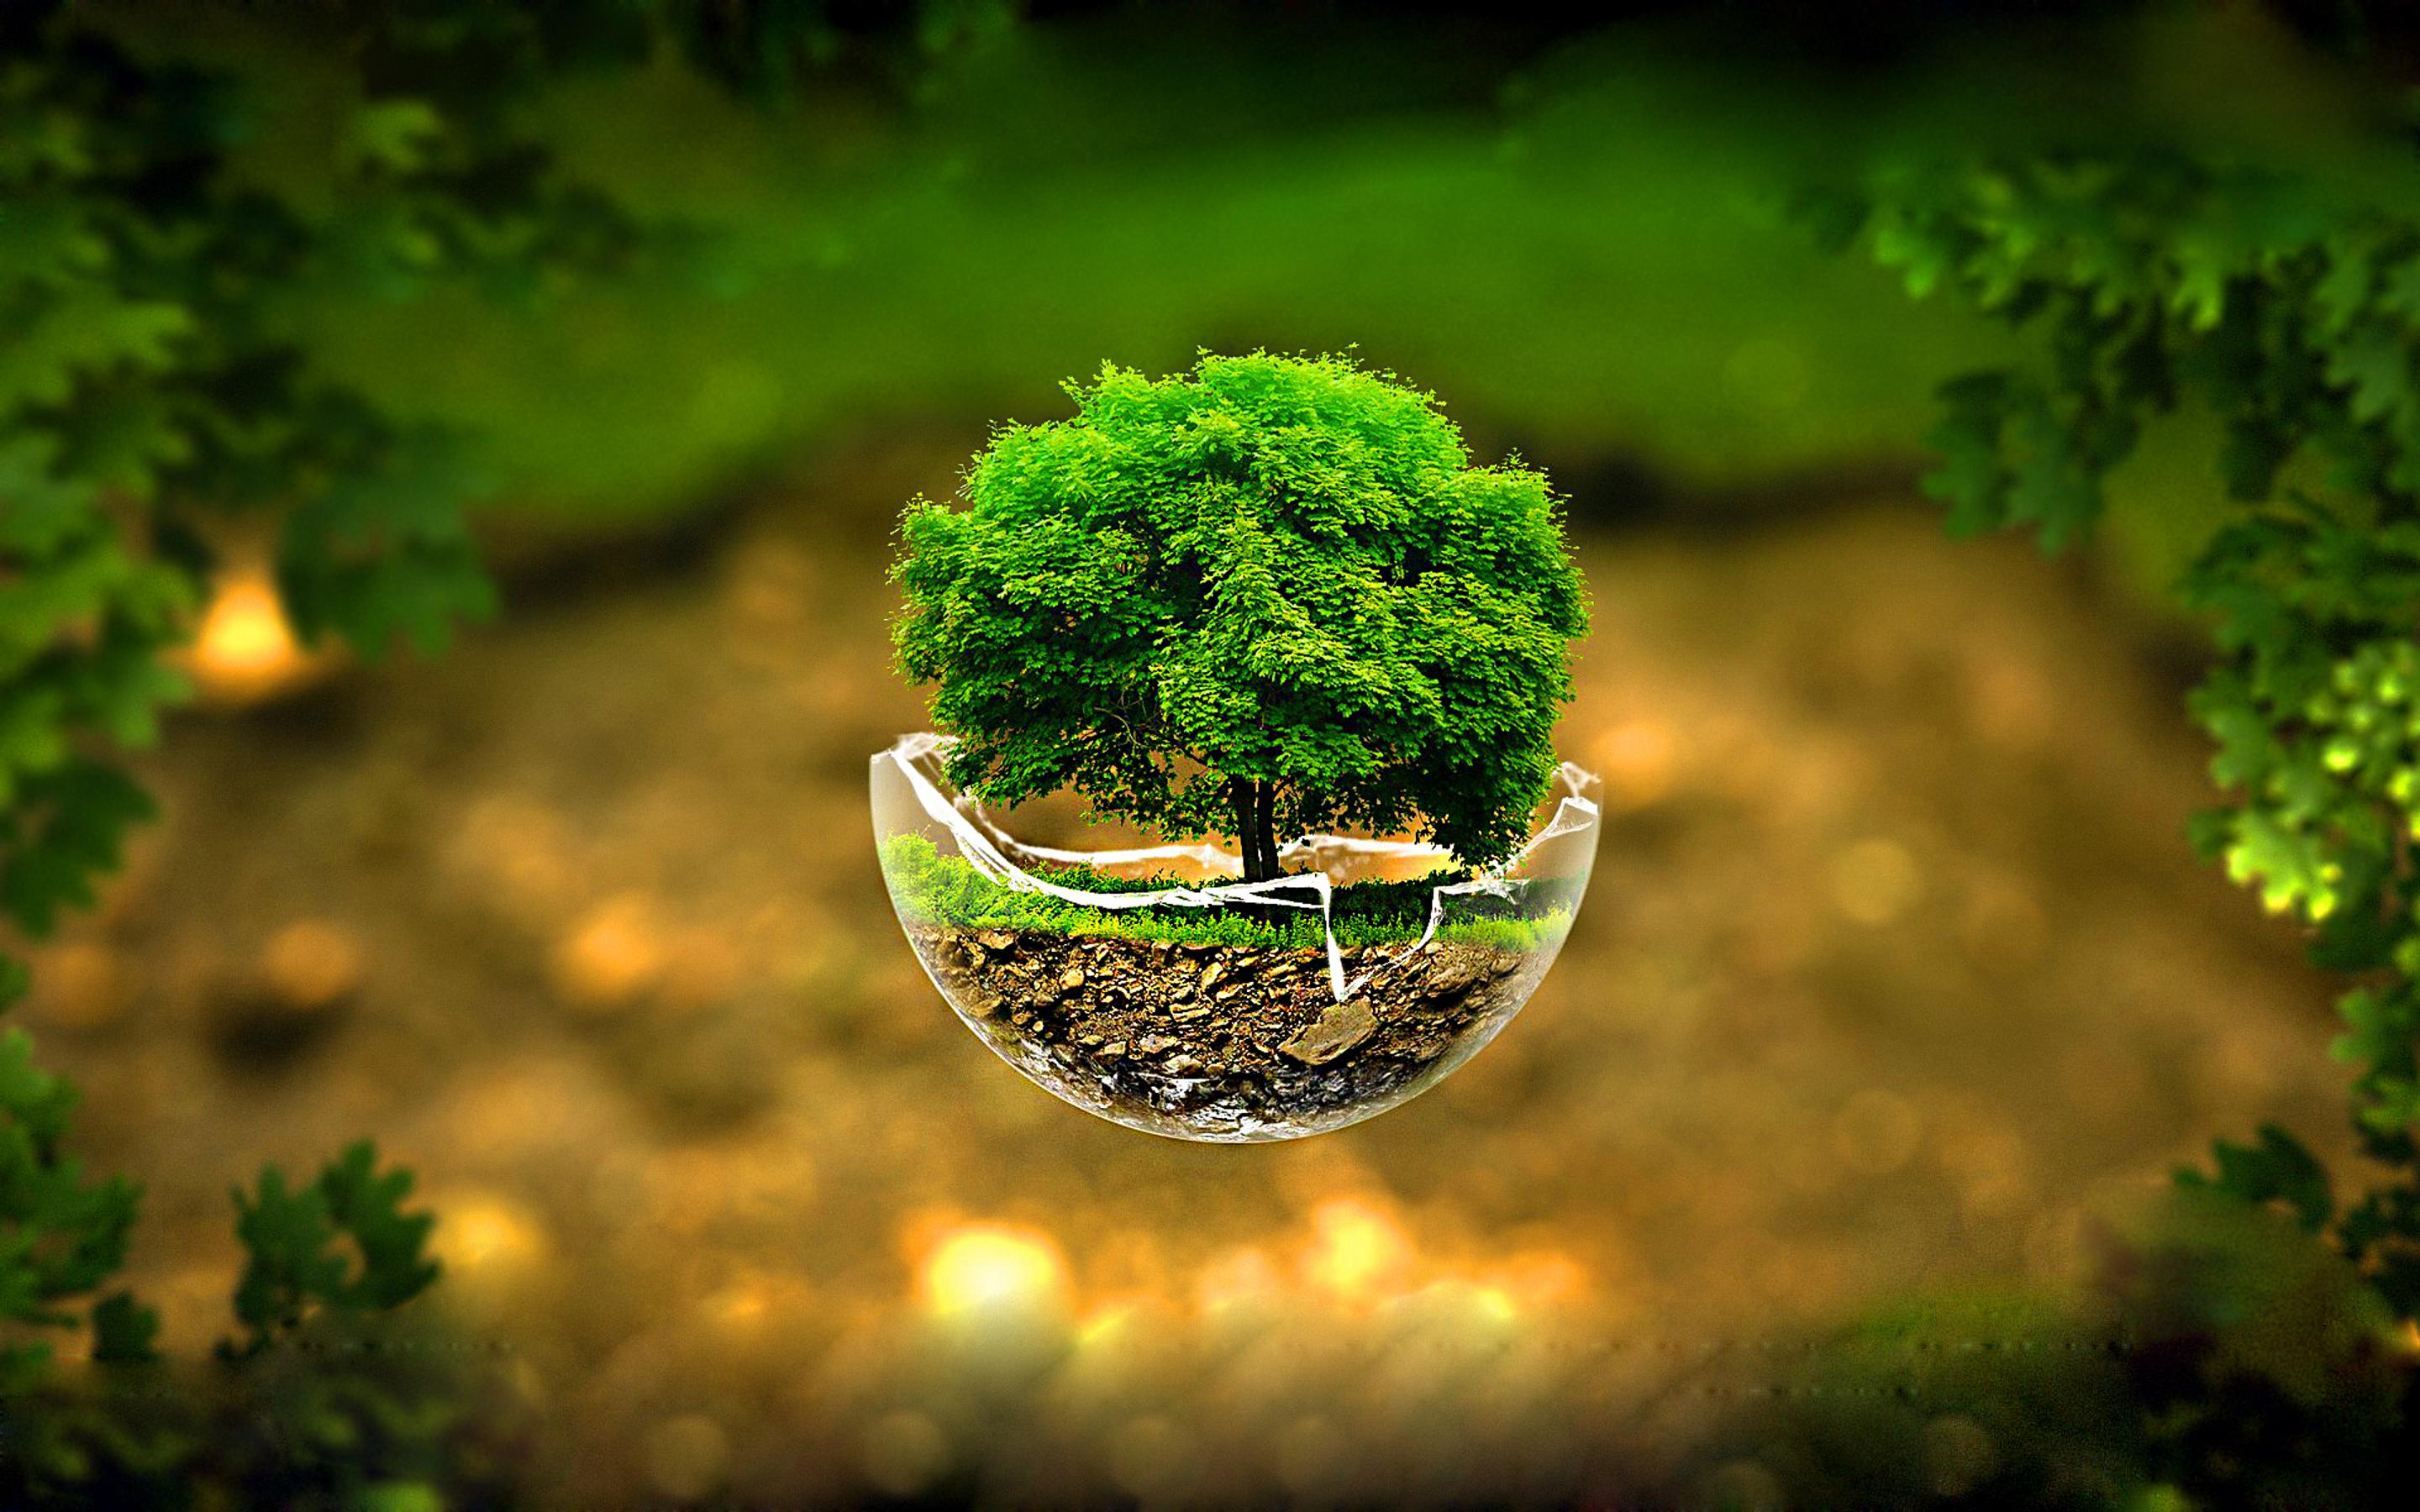 Small tree in a globe glass -Nature lives everywhere is love